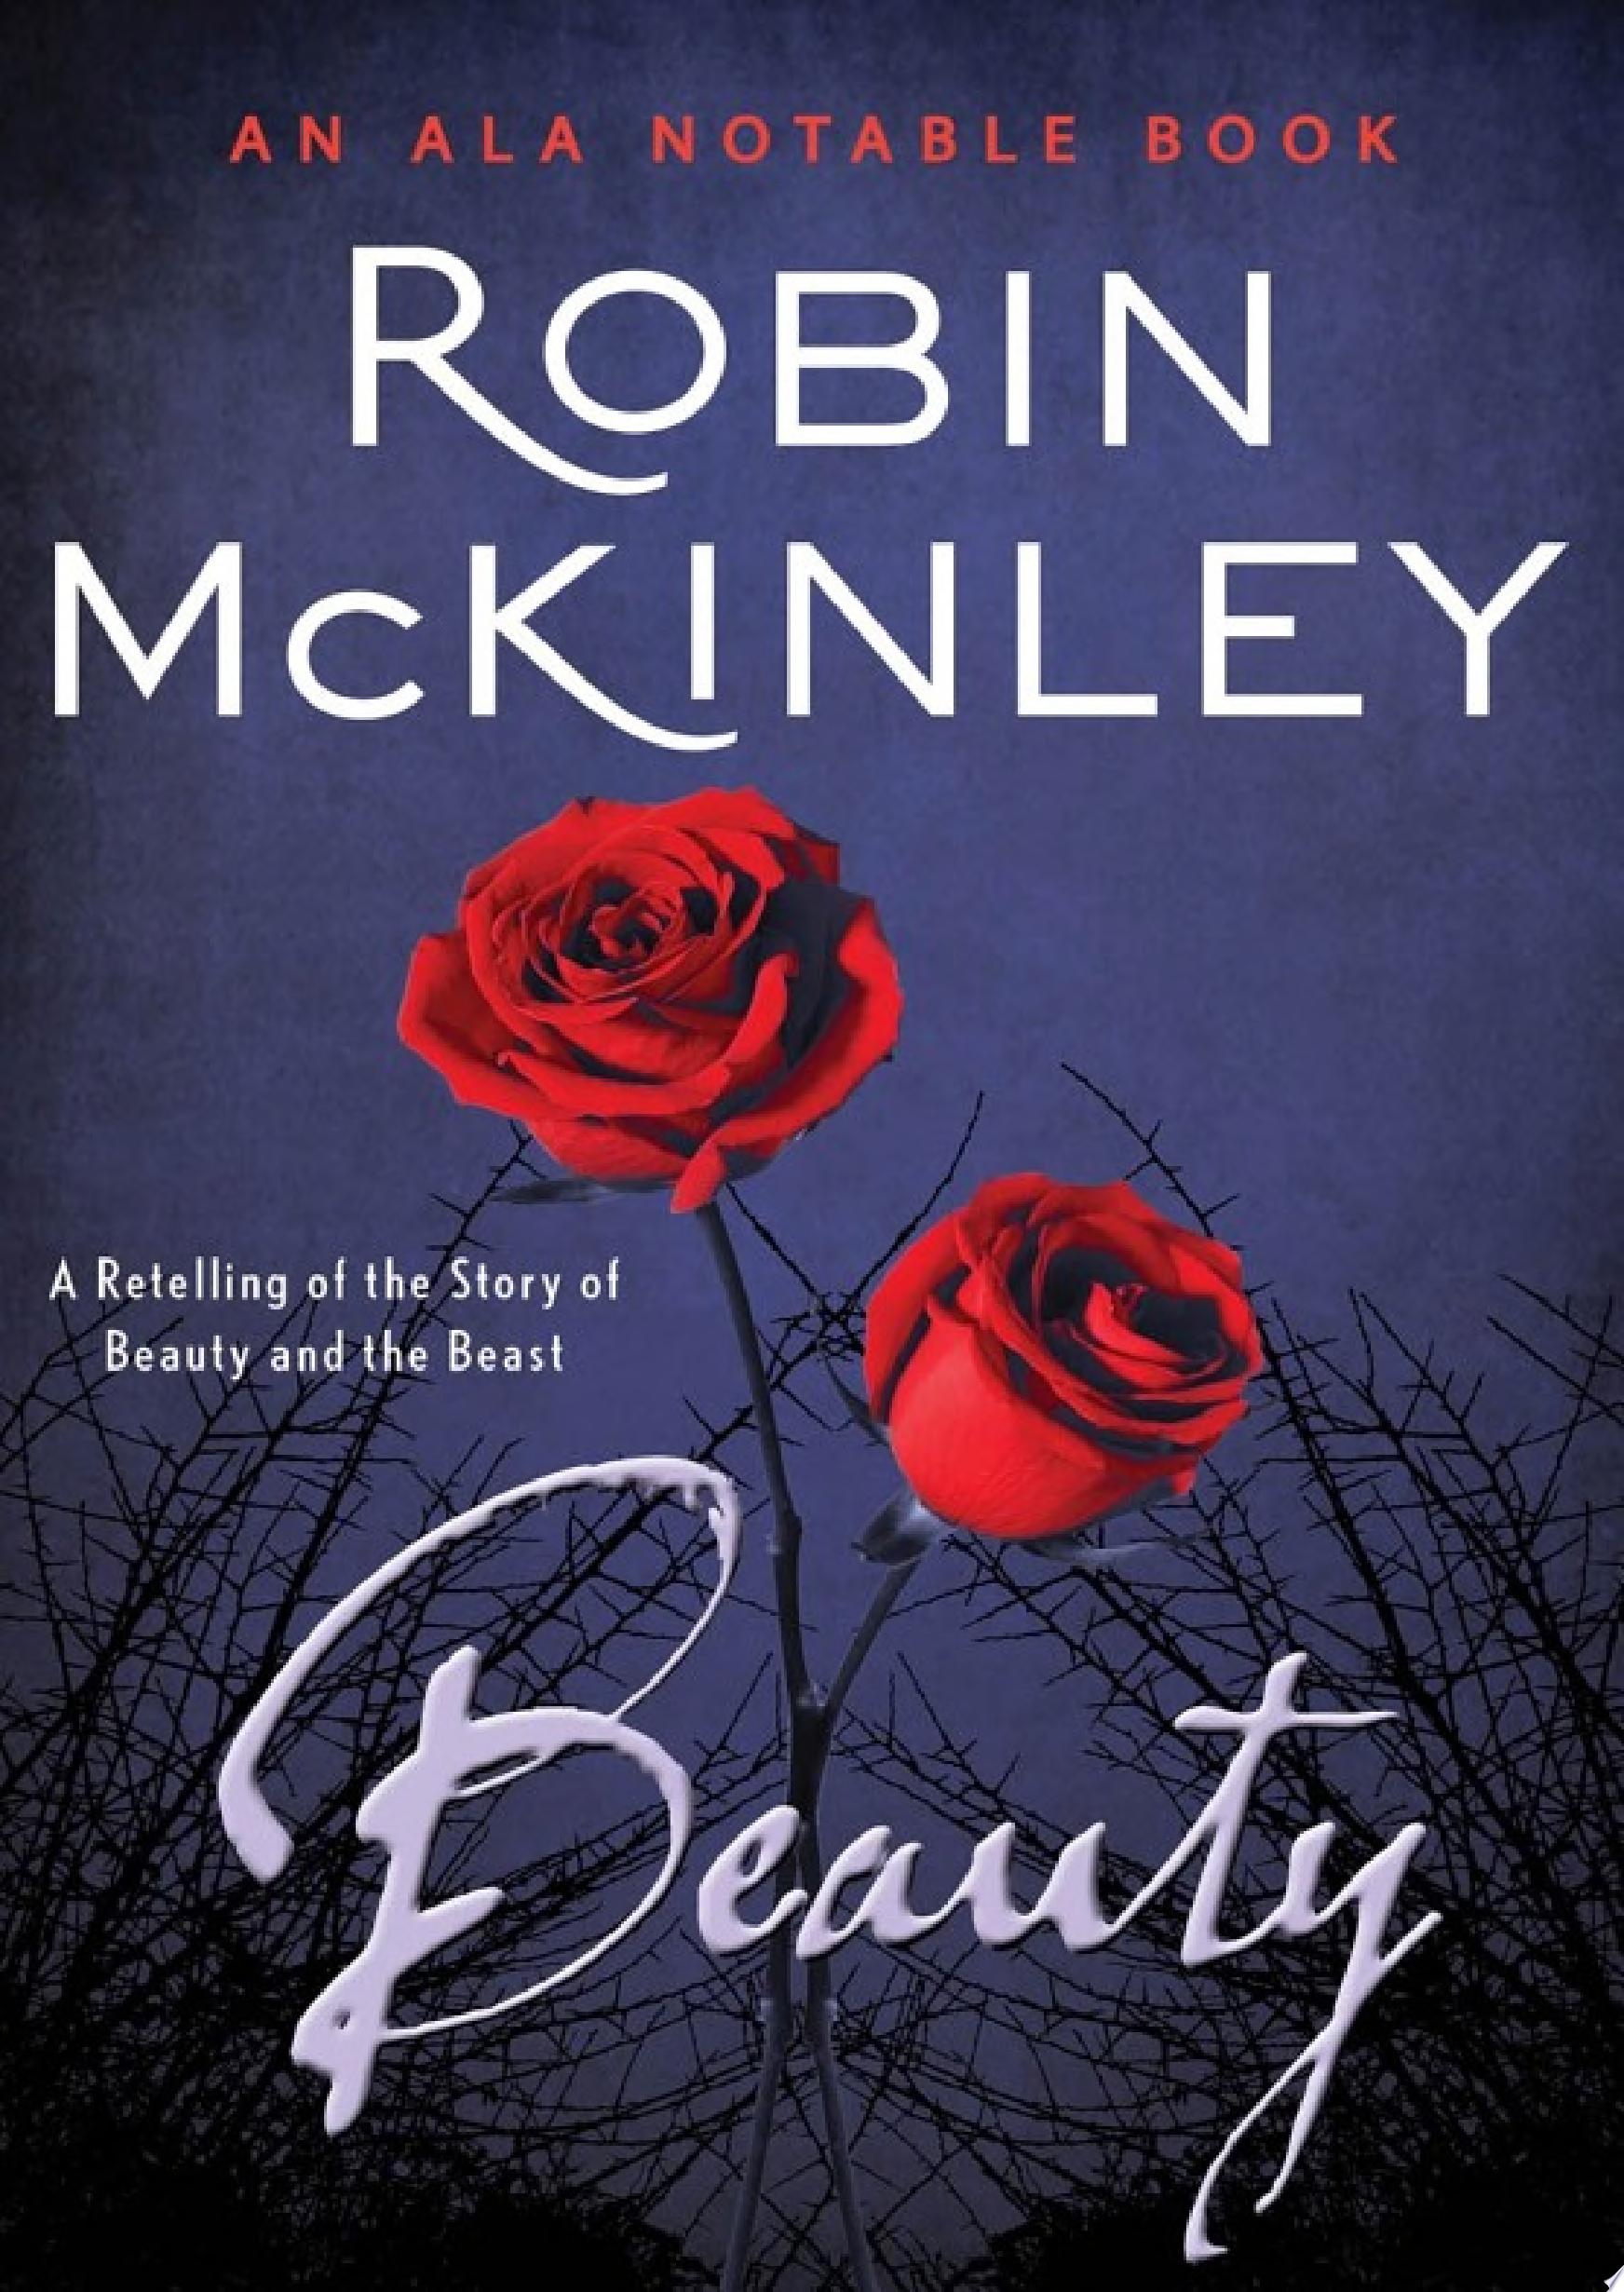 Image for "Beauty"